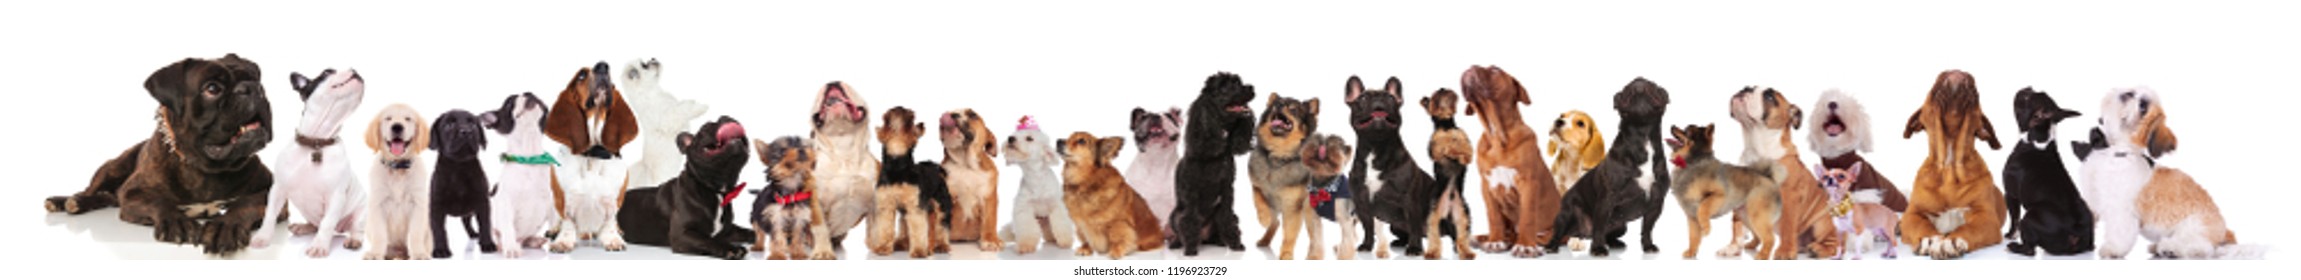 adorable large team of curious dogs standing and sitting on white background and looking up. They are wearing colorful collars and red bowties - Shutterstock ID 1196923729